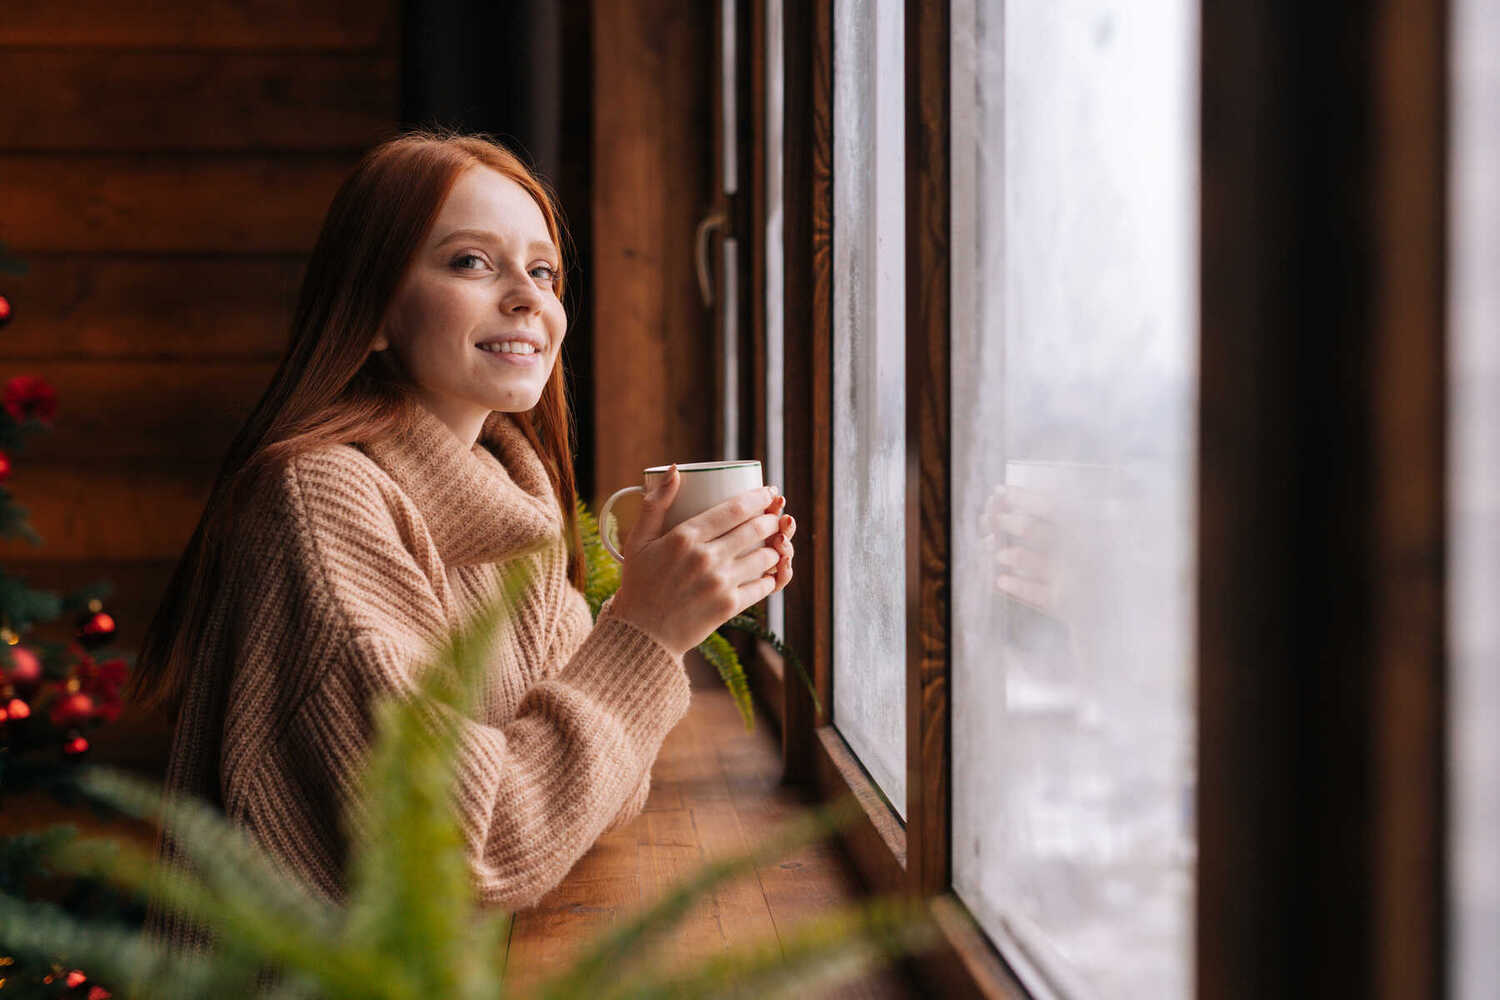 side-view-of-charming-smiling-young-red-haired-woman-with-cup-standing-by-window-at-home.-1290587665-6000x4000.jpeg